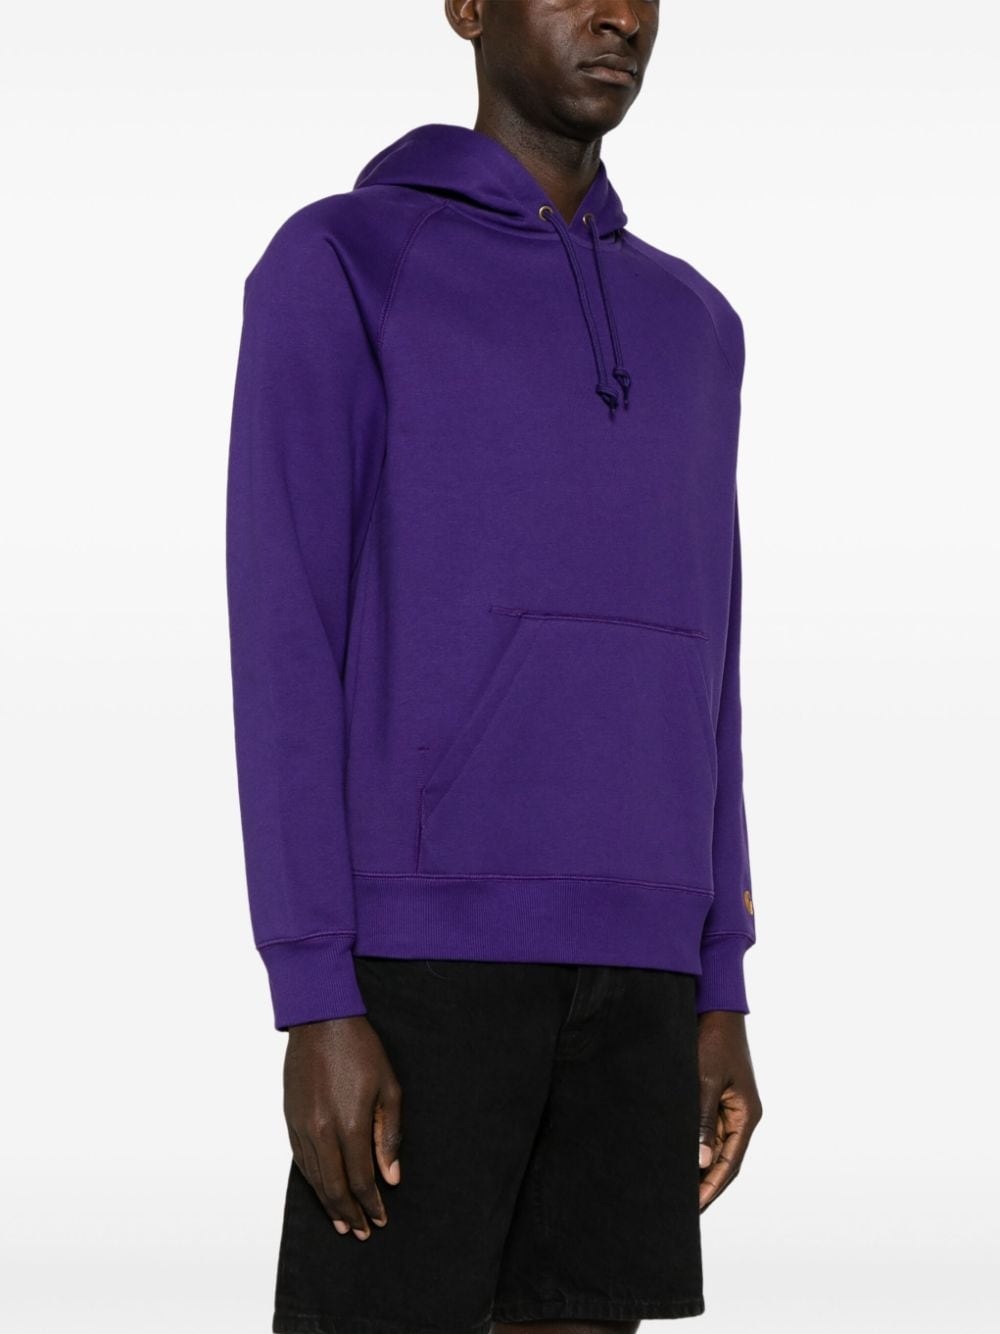 Chase cotton hoodie - 3